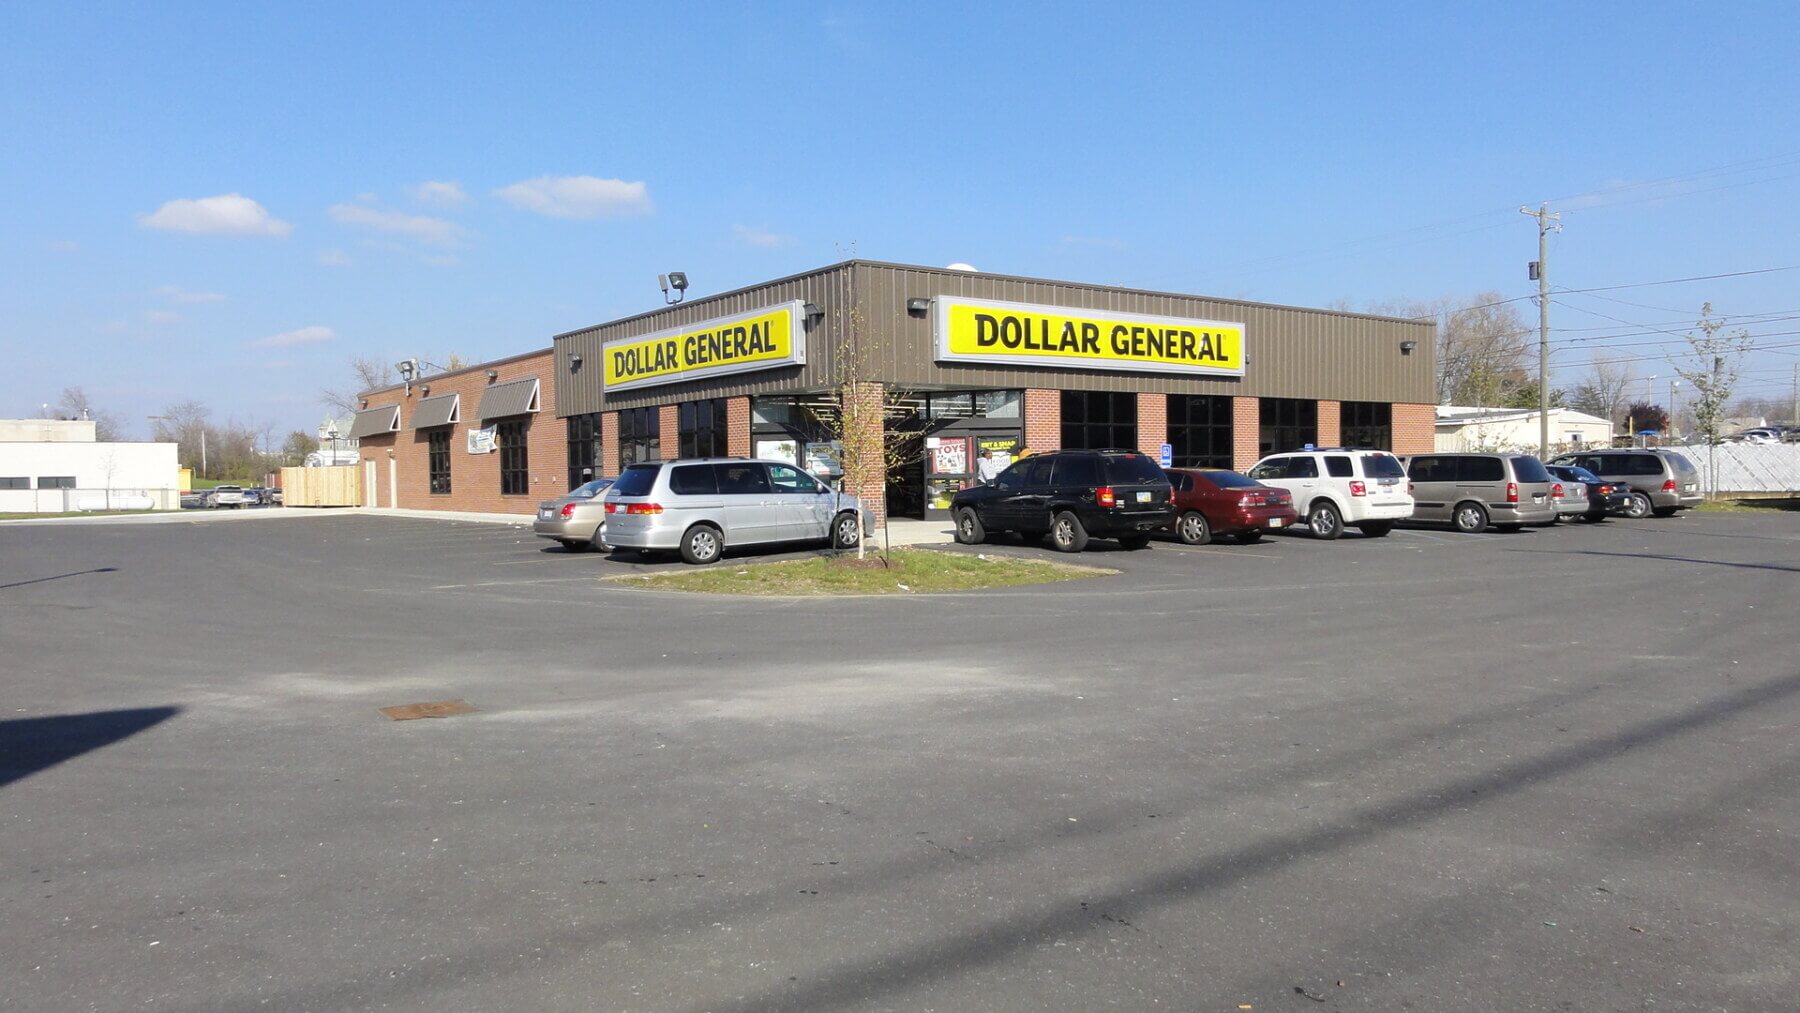 a dollar general store and parking lot